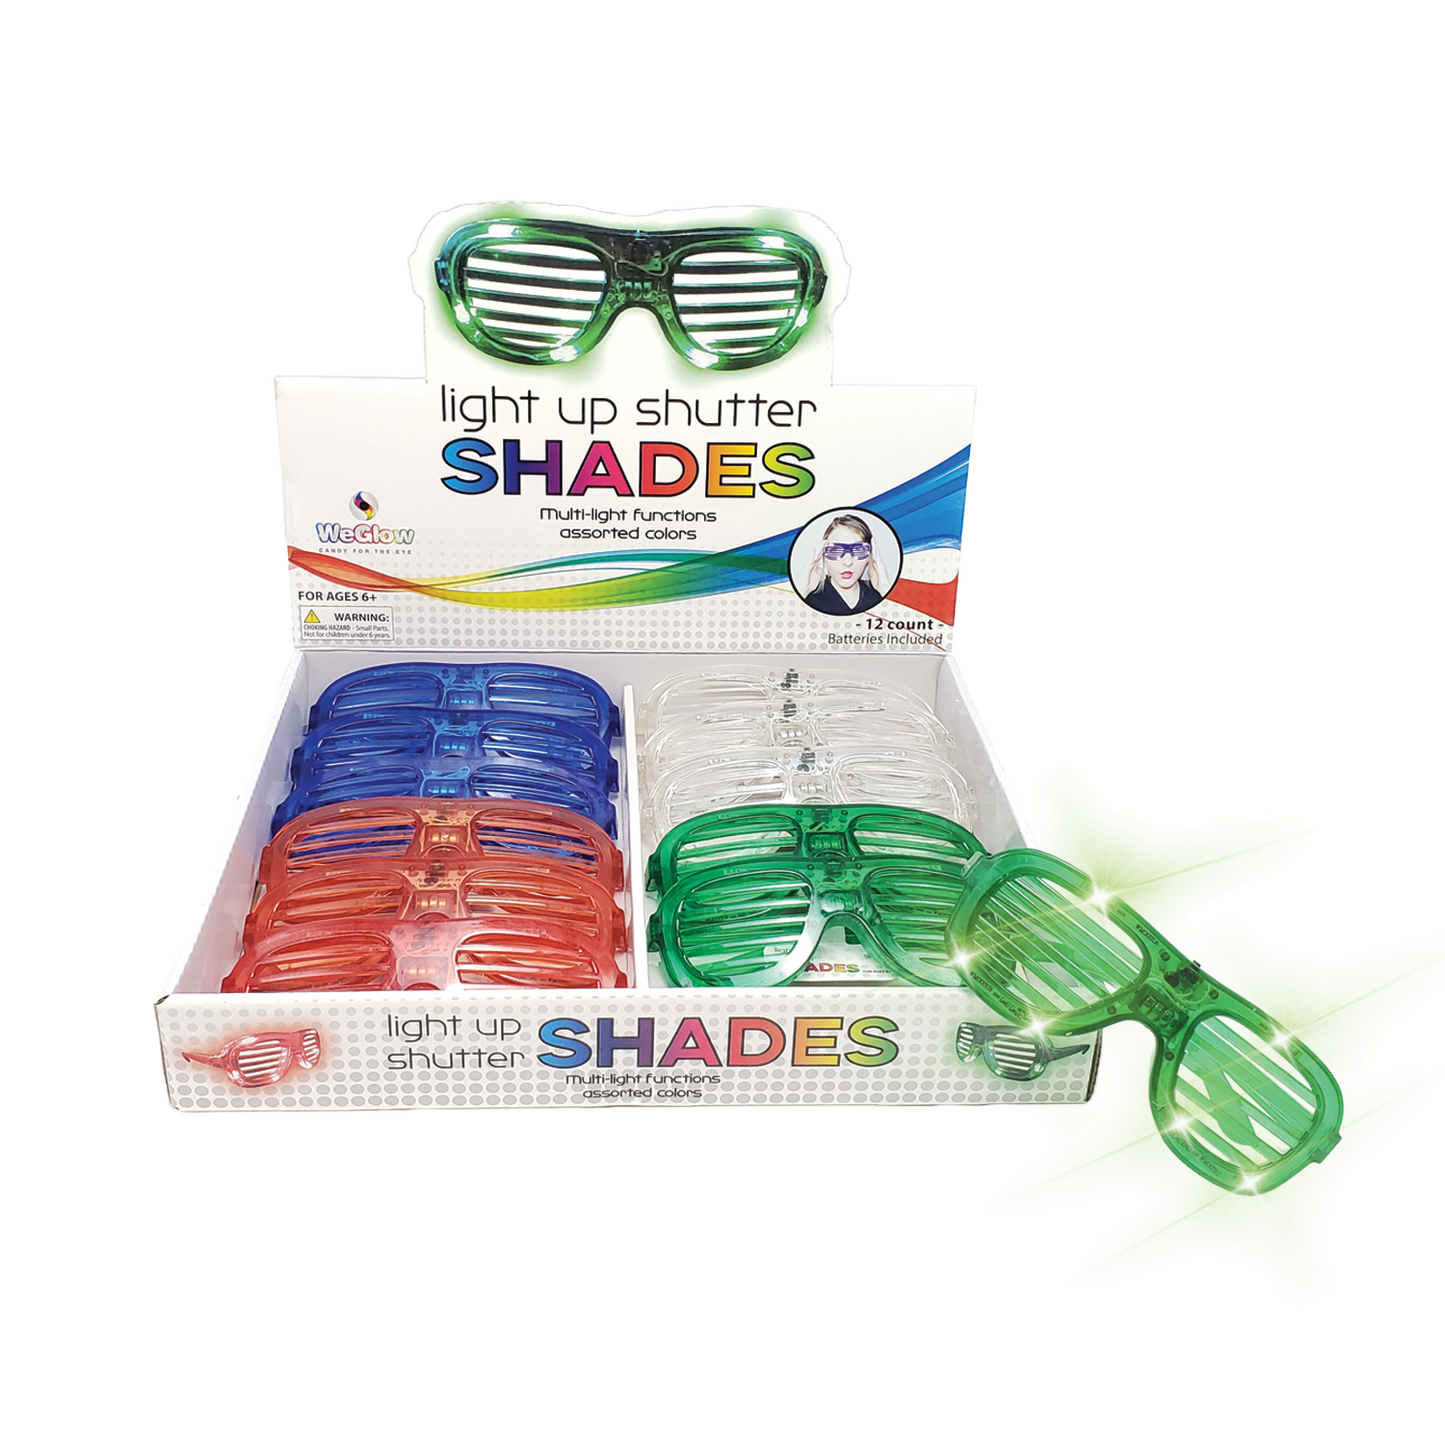 Light Up Shutter Shades | LED Glasses | 12 Pack with Batteries